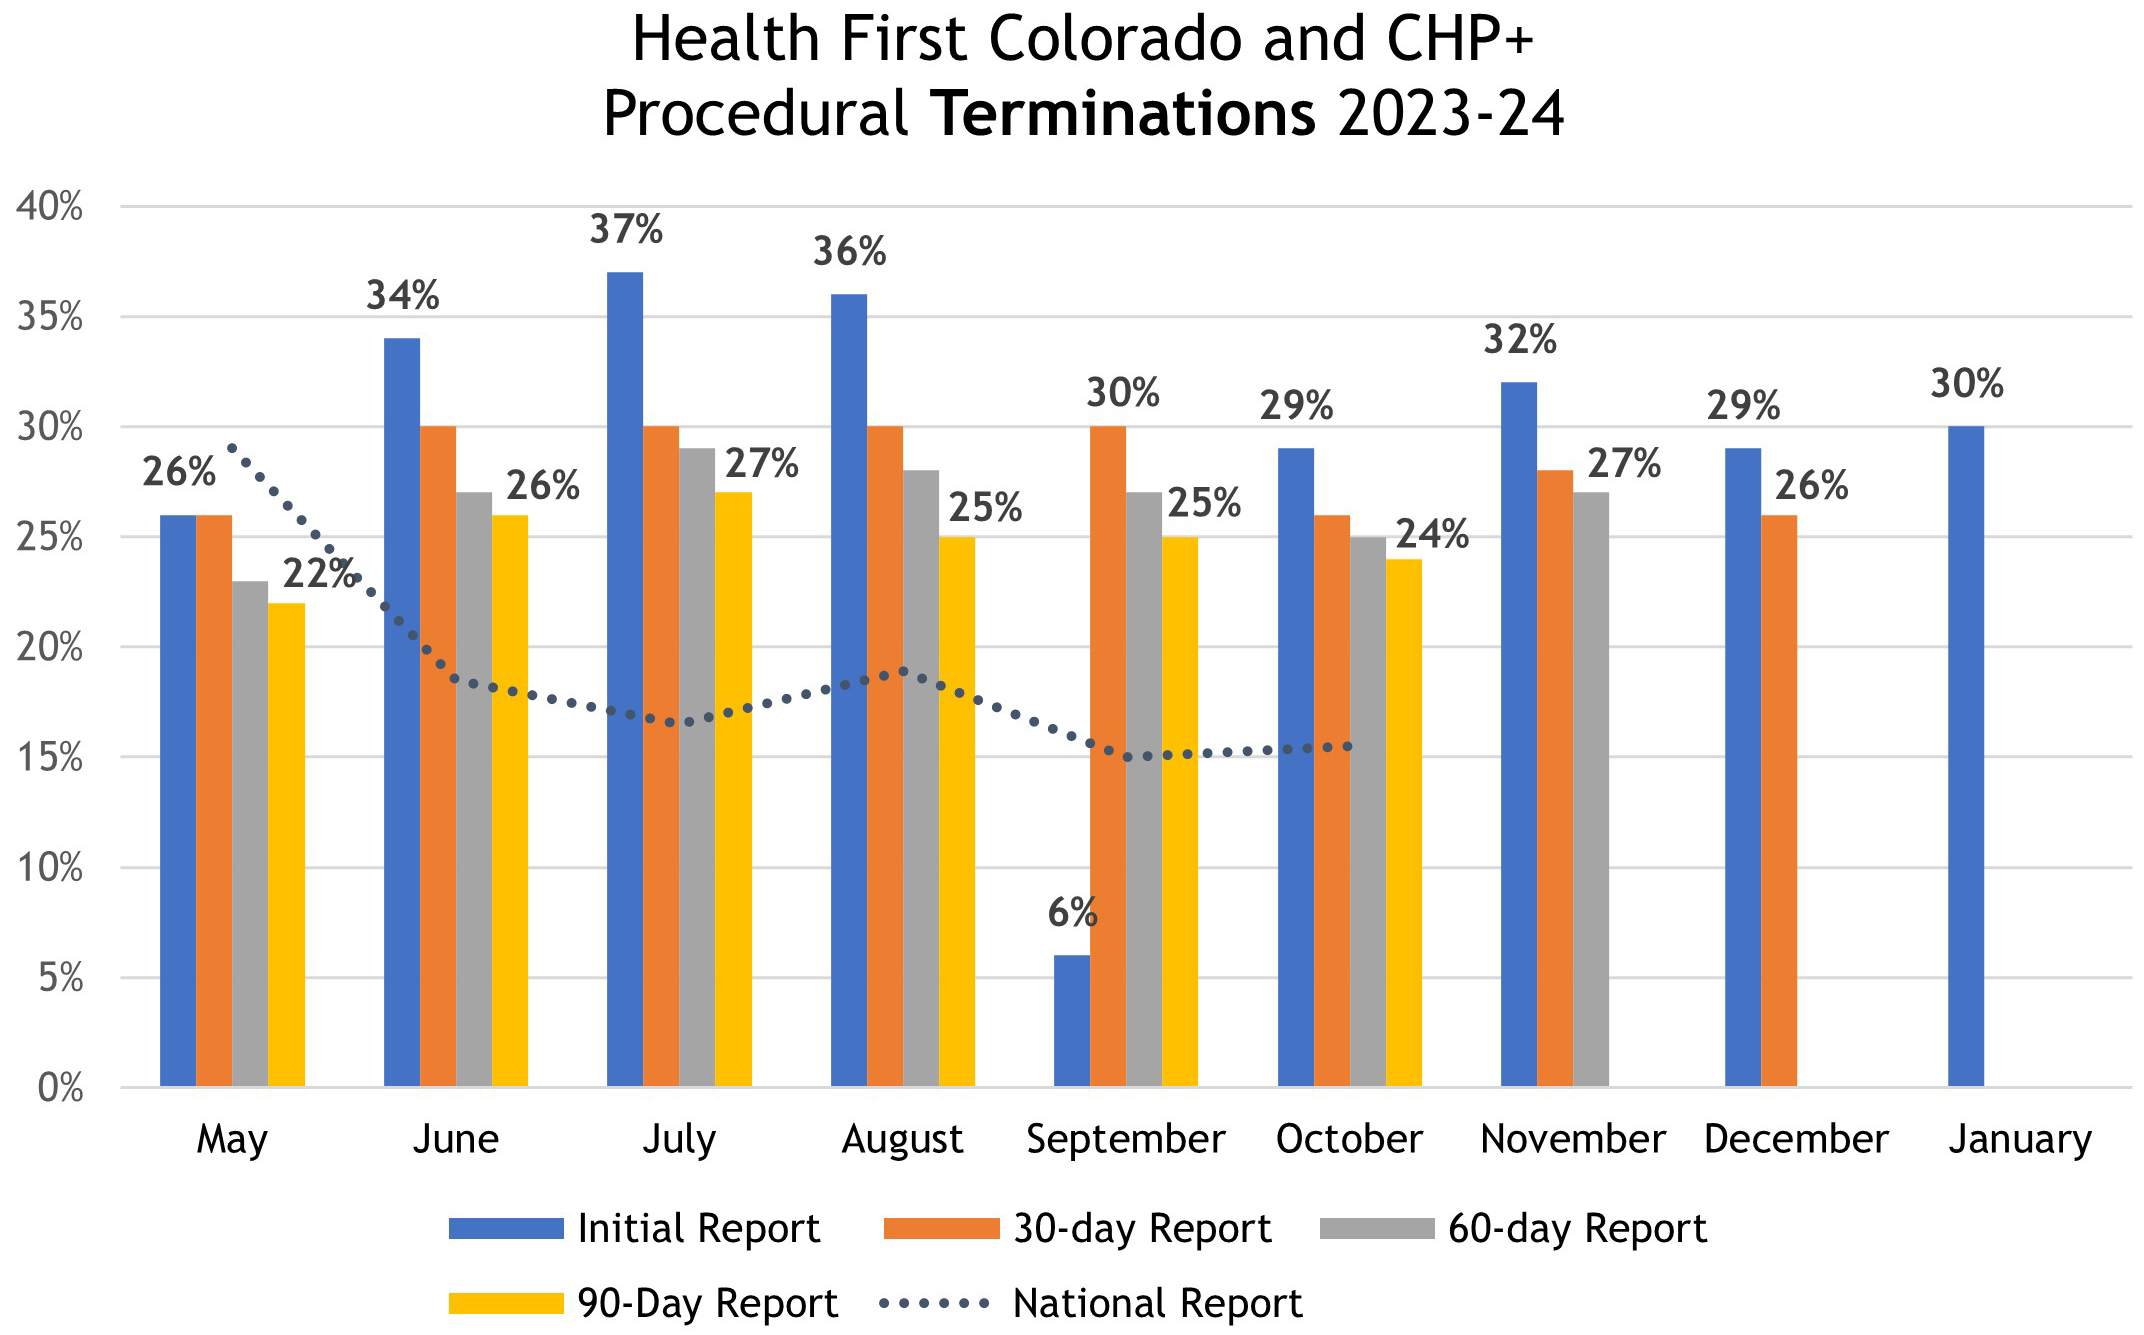 This bar chart shows Health First Colorado and CHP+ 2023 procedural terminations decreasing over time. Procedural terminations in May were reported as 26% initially and decreased to 22% over the next 90 days. Procedural terminations in June were reported as 34% initially and decreased to 26% over the next 90 days. Procedural terminations in July were reported as 37% initially and decreased to 27% over the next 90 days. Procedural terminations in August were reported as 36% initially and decreased to 25% over the next 90 days. Procedural terminations in September were temporarily paused during the first 30 days while system changes were implemented, reported as 30% 60 days out and decreased to 25% 90 days out.  Procedural terminations in October were reported as 29% initially and decreased to 24% over the next 90 days. Procedural terminations in November were reported as 32% initially and decreased to 27% over the next 60 days.  Procedural terminations in December were reported as 29% initially and decreased to 26% over the next 30 days. January procedural terminations were reported as 30%.